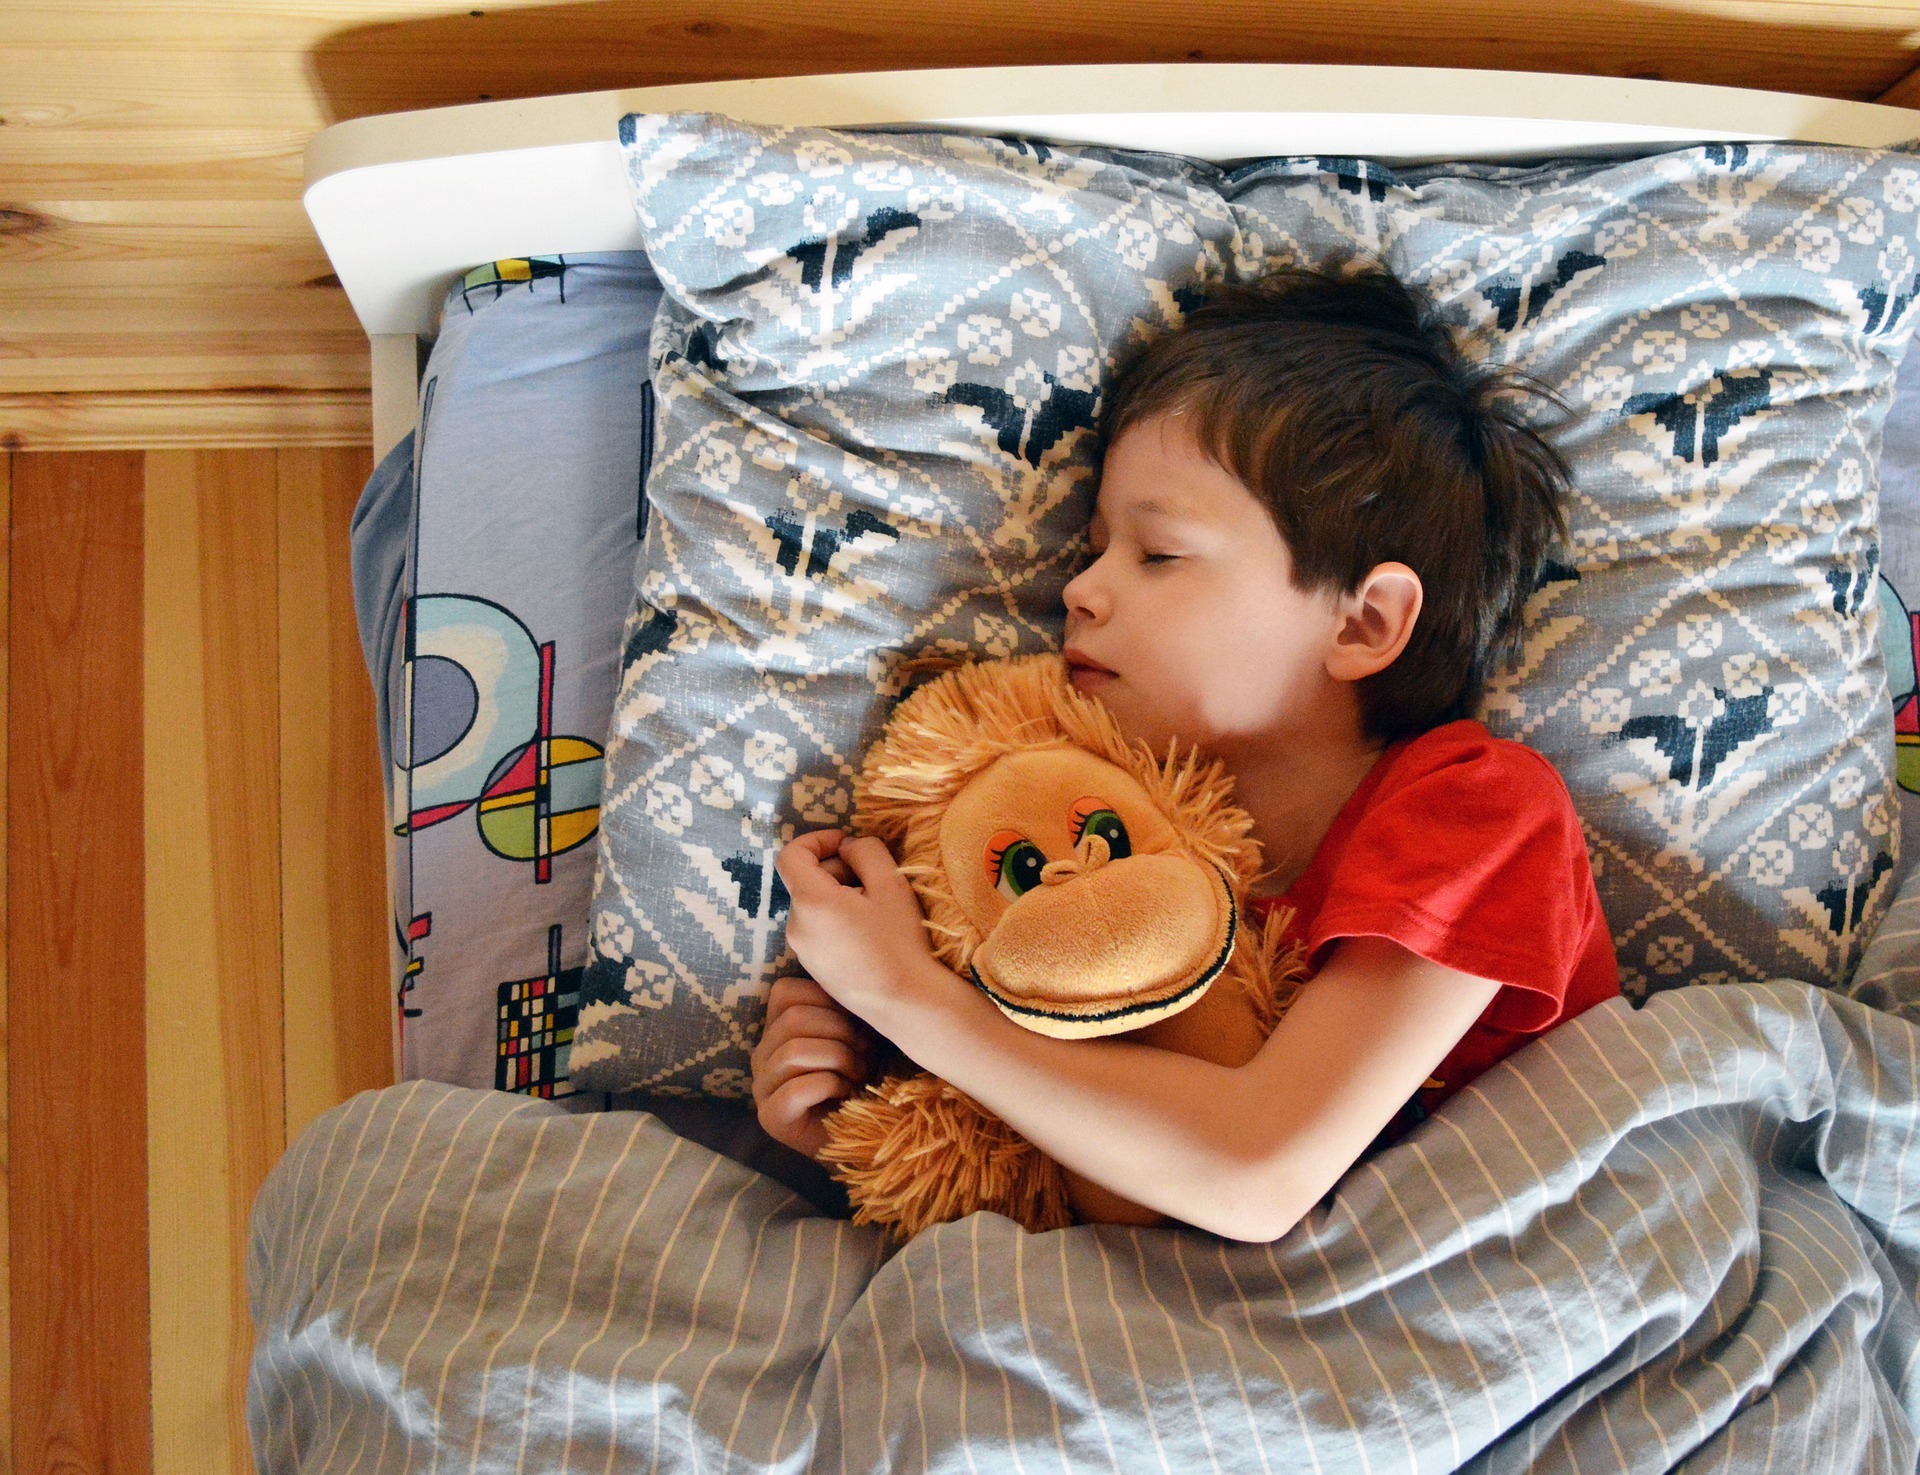 Child in bed with teddy bear